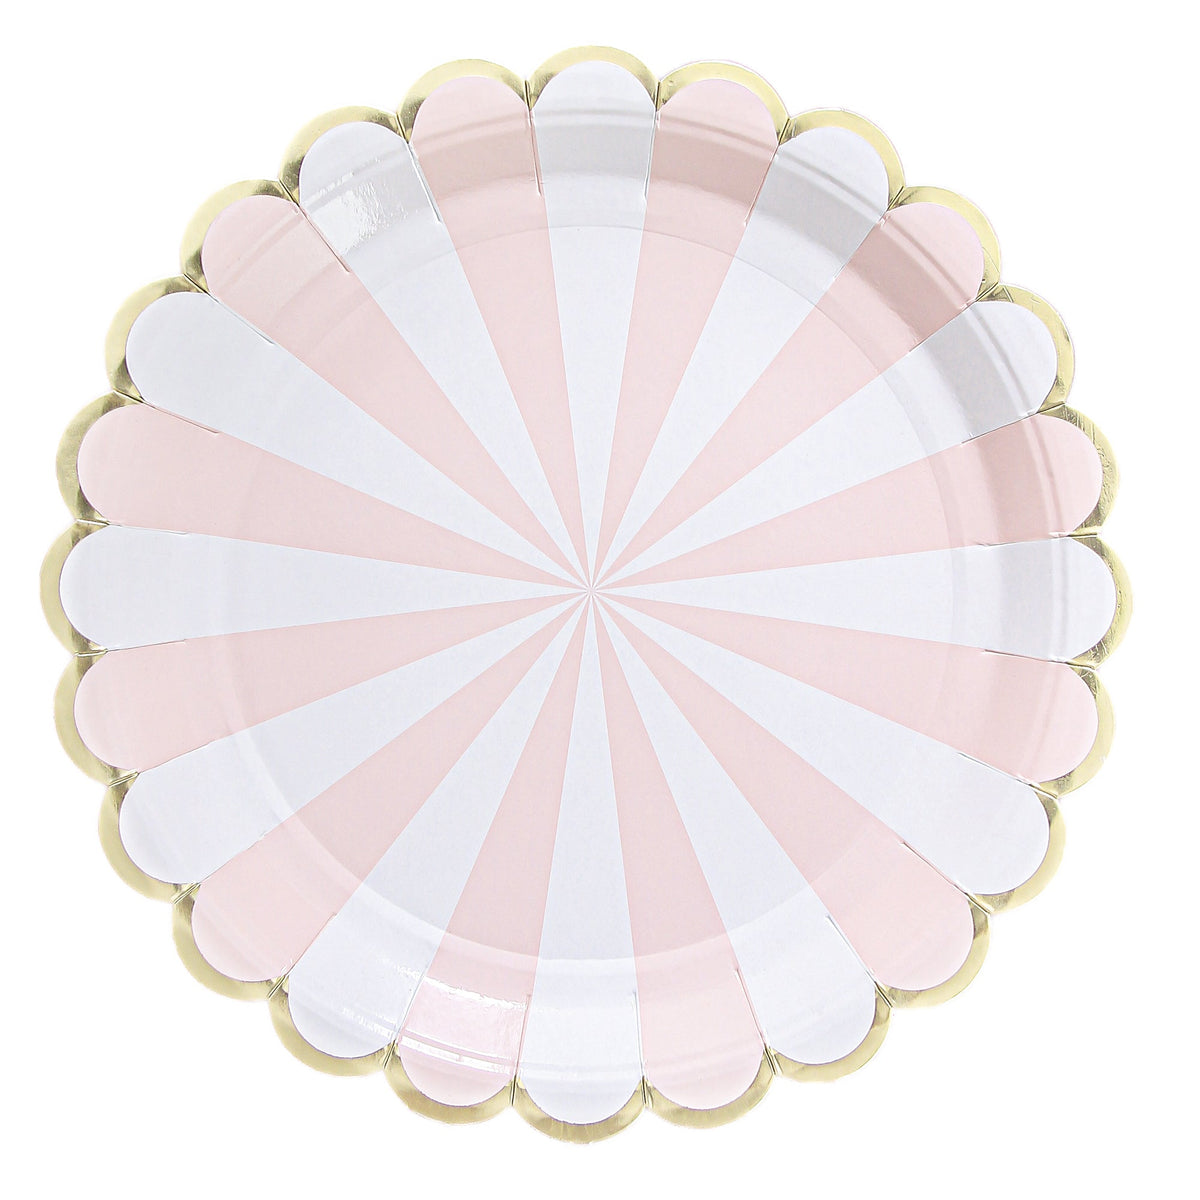 YIWU SANDY PAPER PRODUCTS CO., LTD Everyday Entertaining Candy Land Large Lunch Paper Plates, Light Pink, 9 Inches, 8 Count